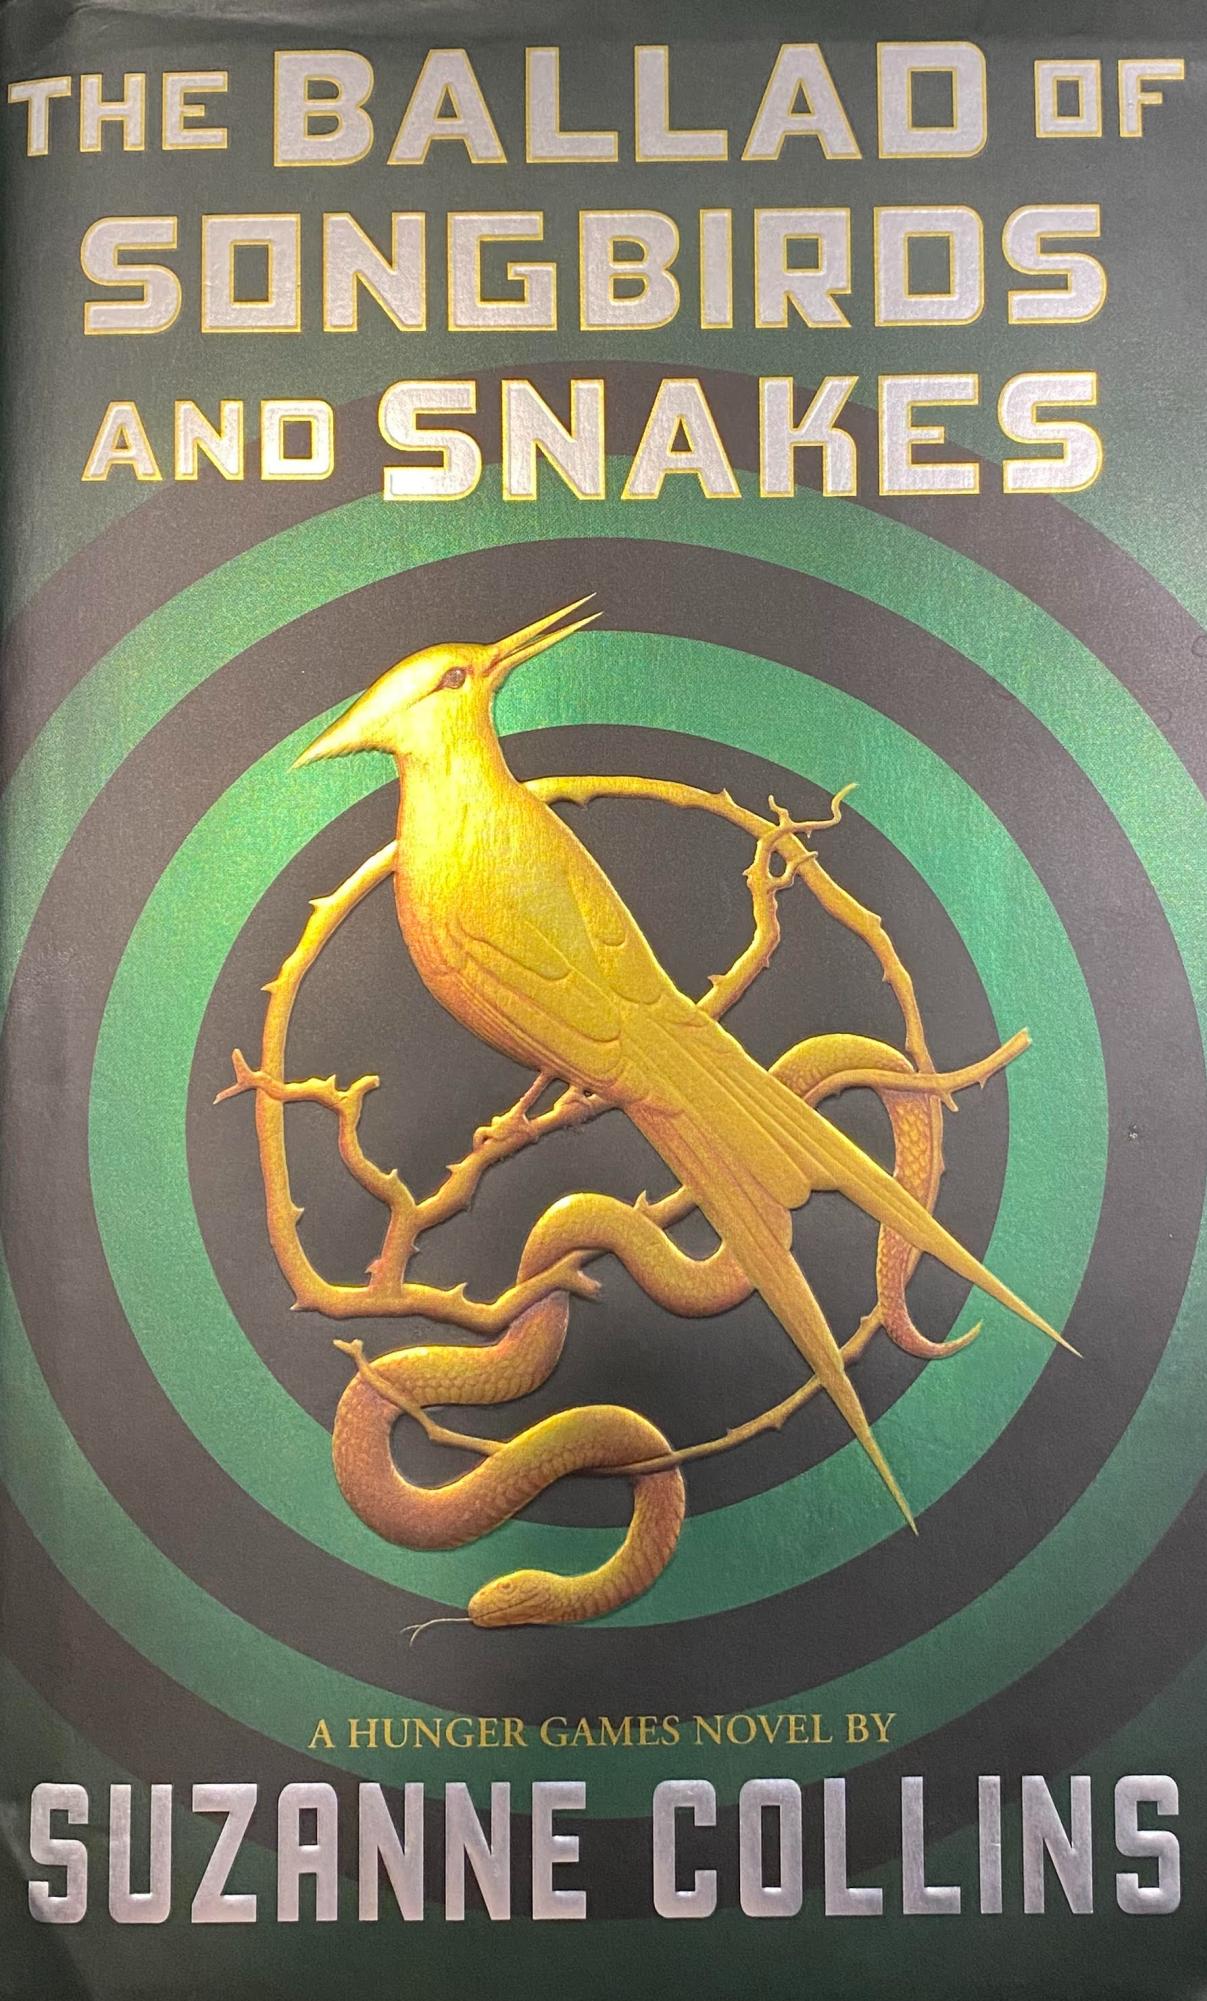 The Hunger Games The Ballad of Songbirds and Snakes Review Stinger